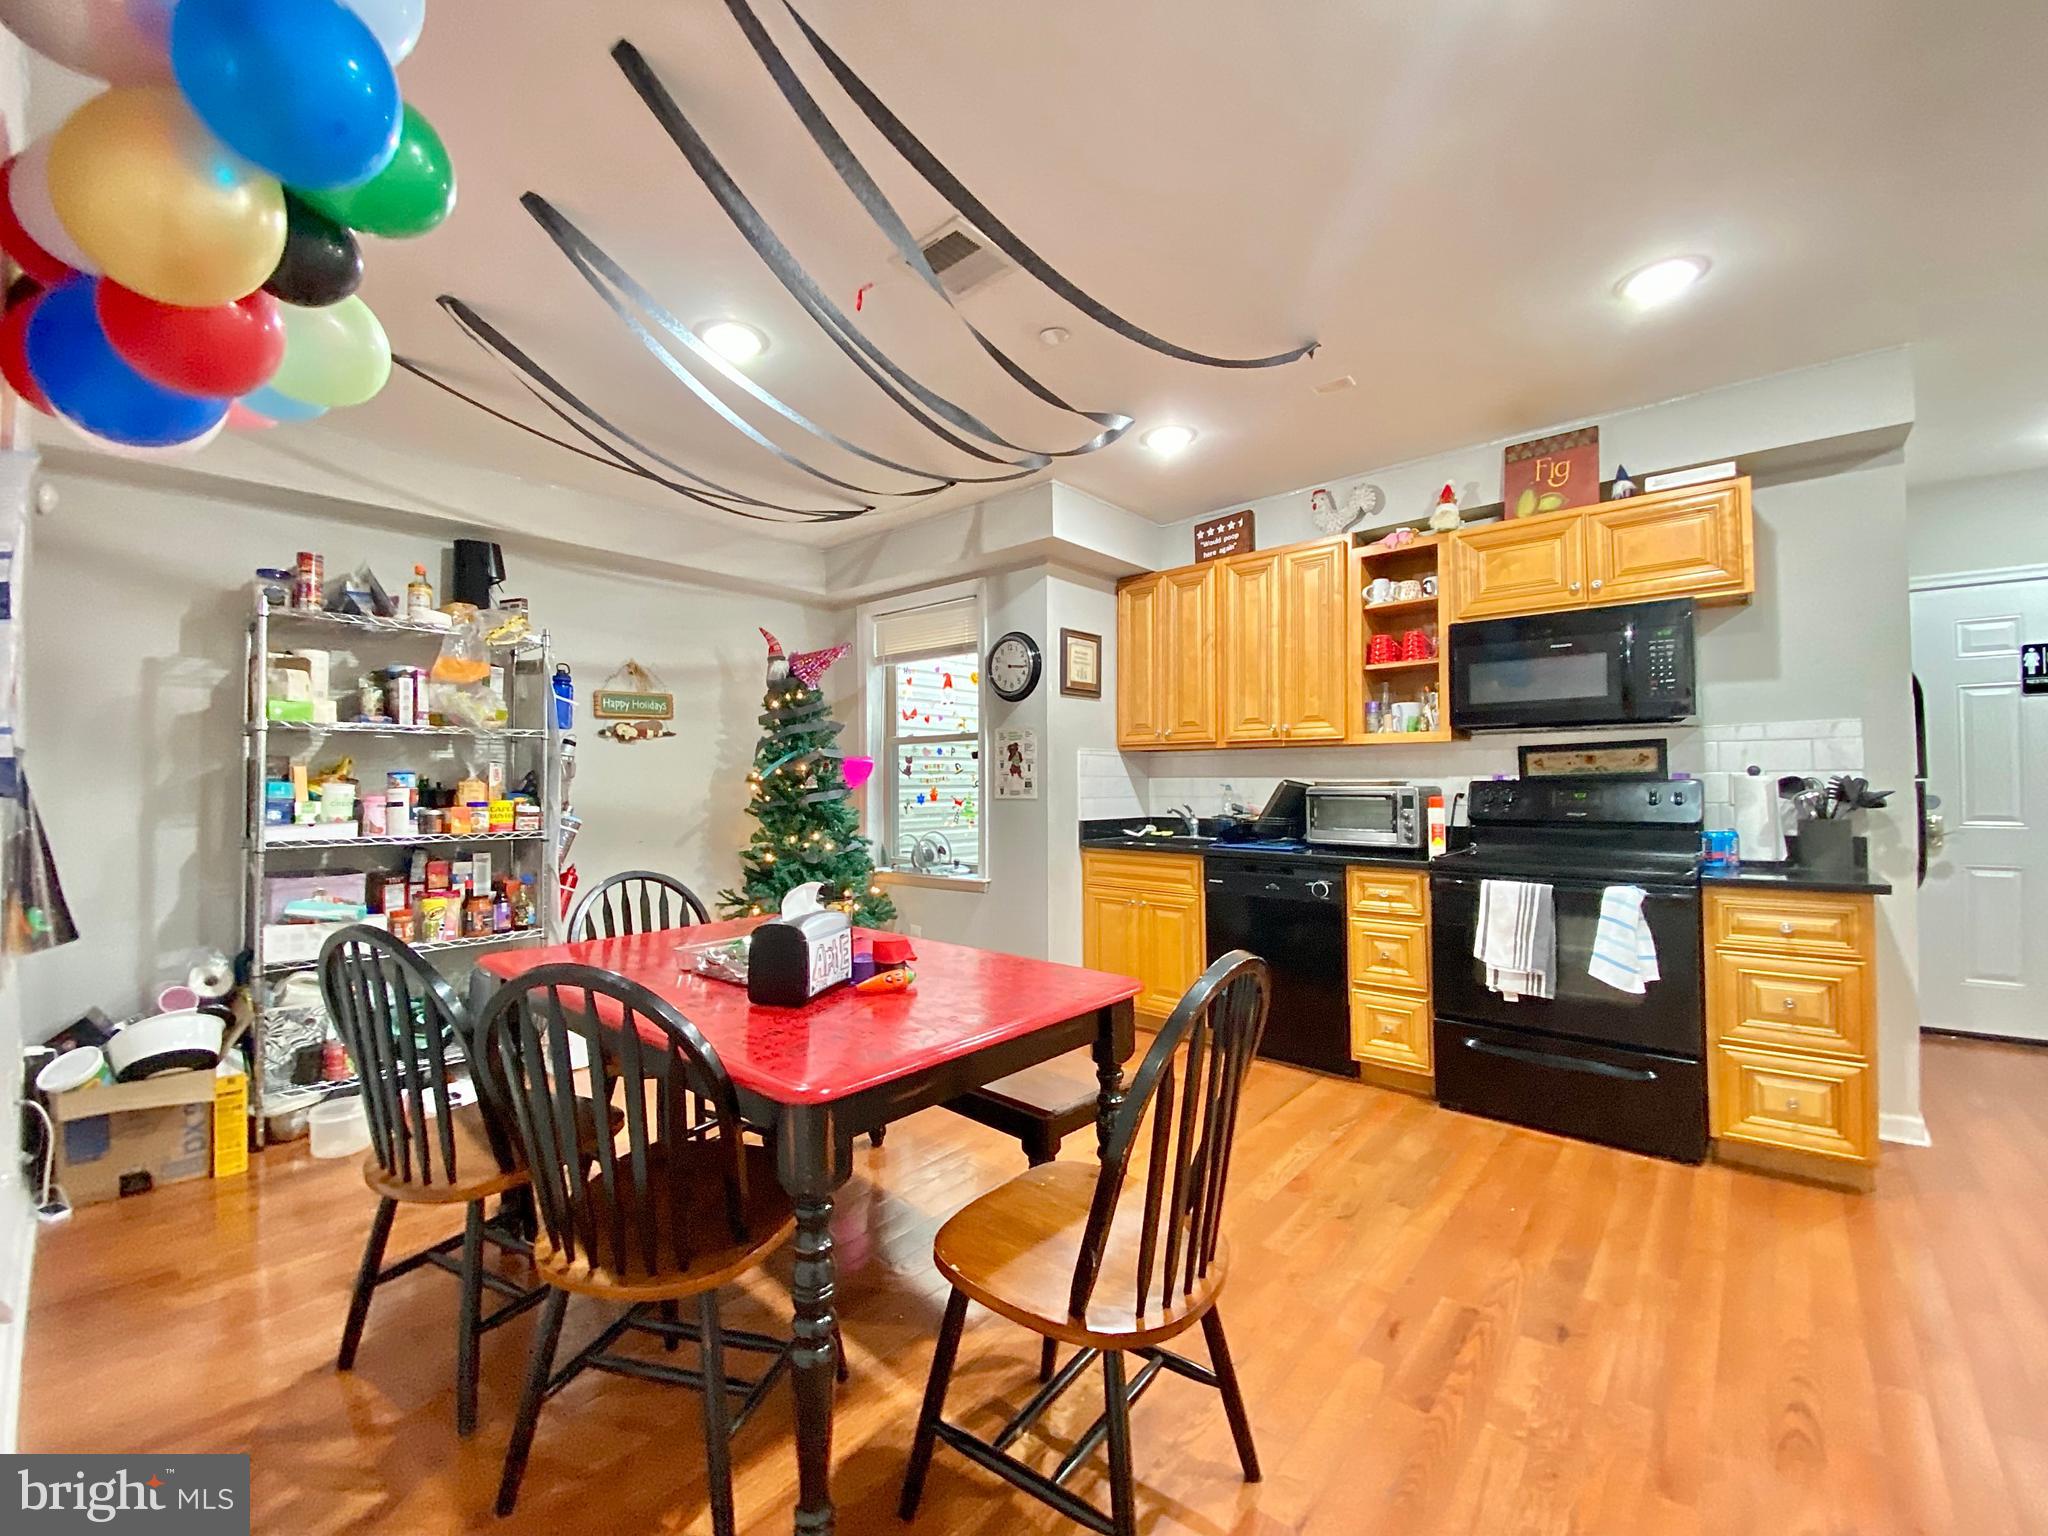 a kitchen with stainless steel appliances kitchen island granite countertop a dining table chairs and granite counter tops